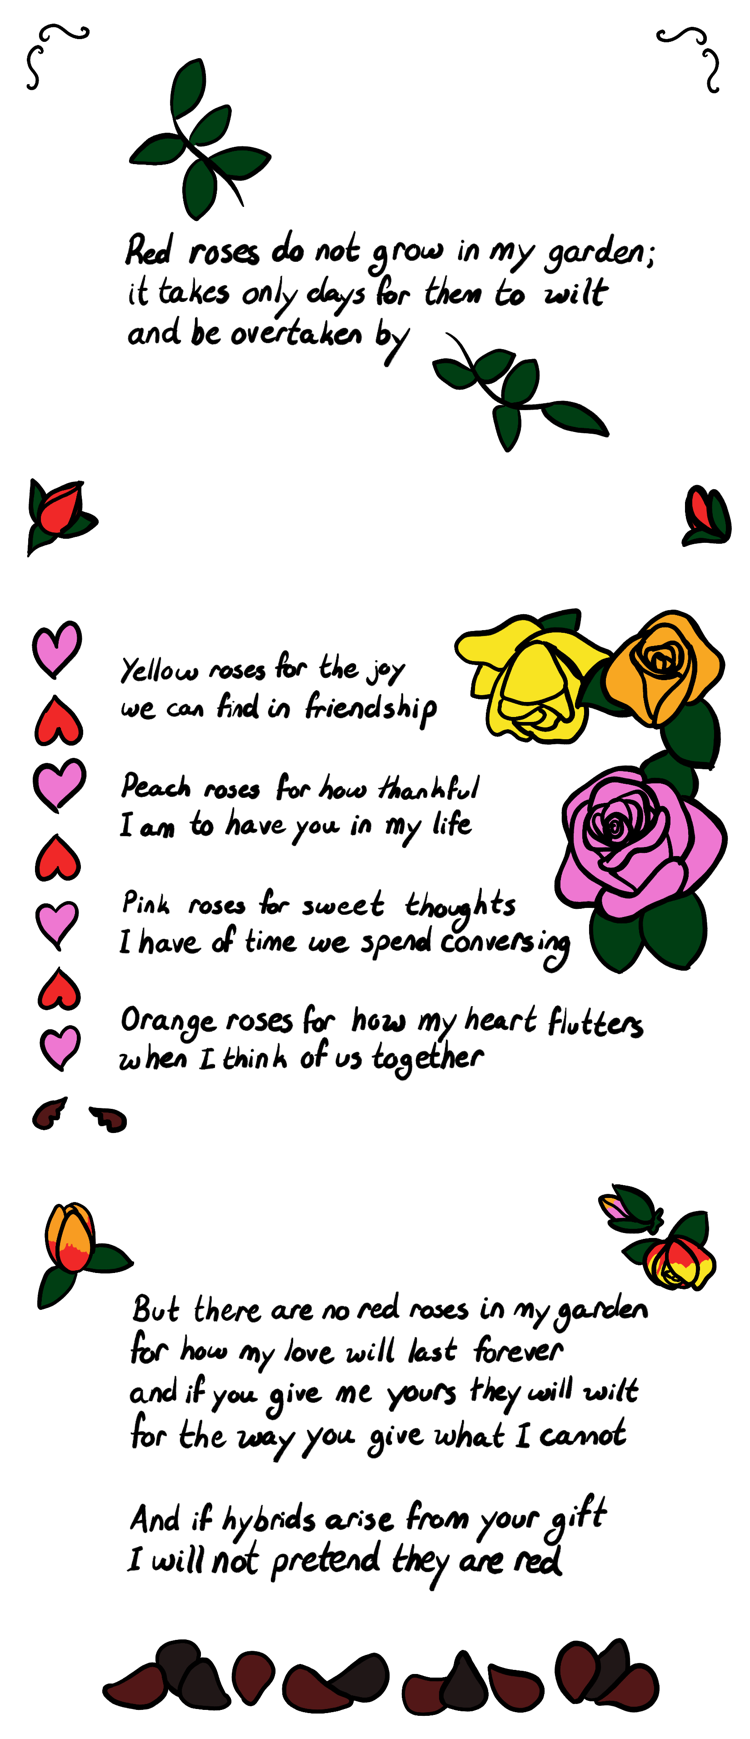 A poem split into three sections with digital art around the words. The first section has leaves growing from the words, rosebuds in the bottom corners, and squiggles in the top corners. The second section has alternating red and pink hearts to the left with the final bottom heart fallen and broken on the bottom. There are three roses in the top right, one yellow, orange, and red. The final section has hybrid rosebuds in the top corners and fallen, decaying rose petals all along the bottom.